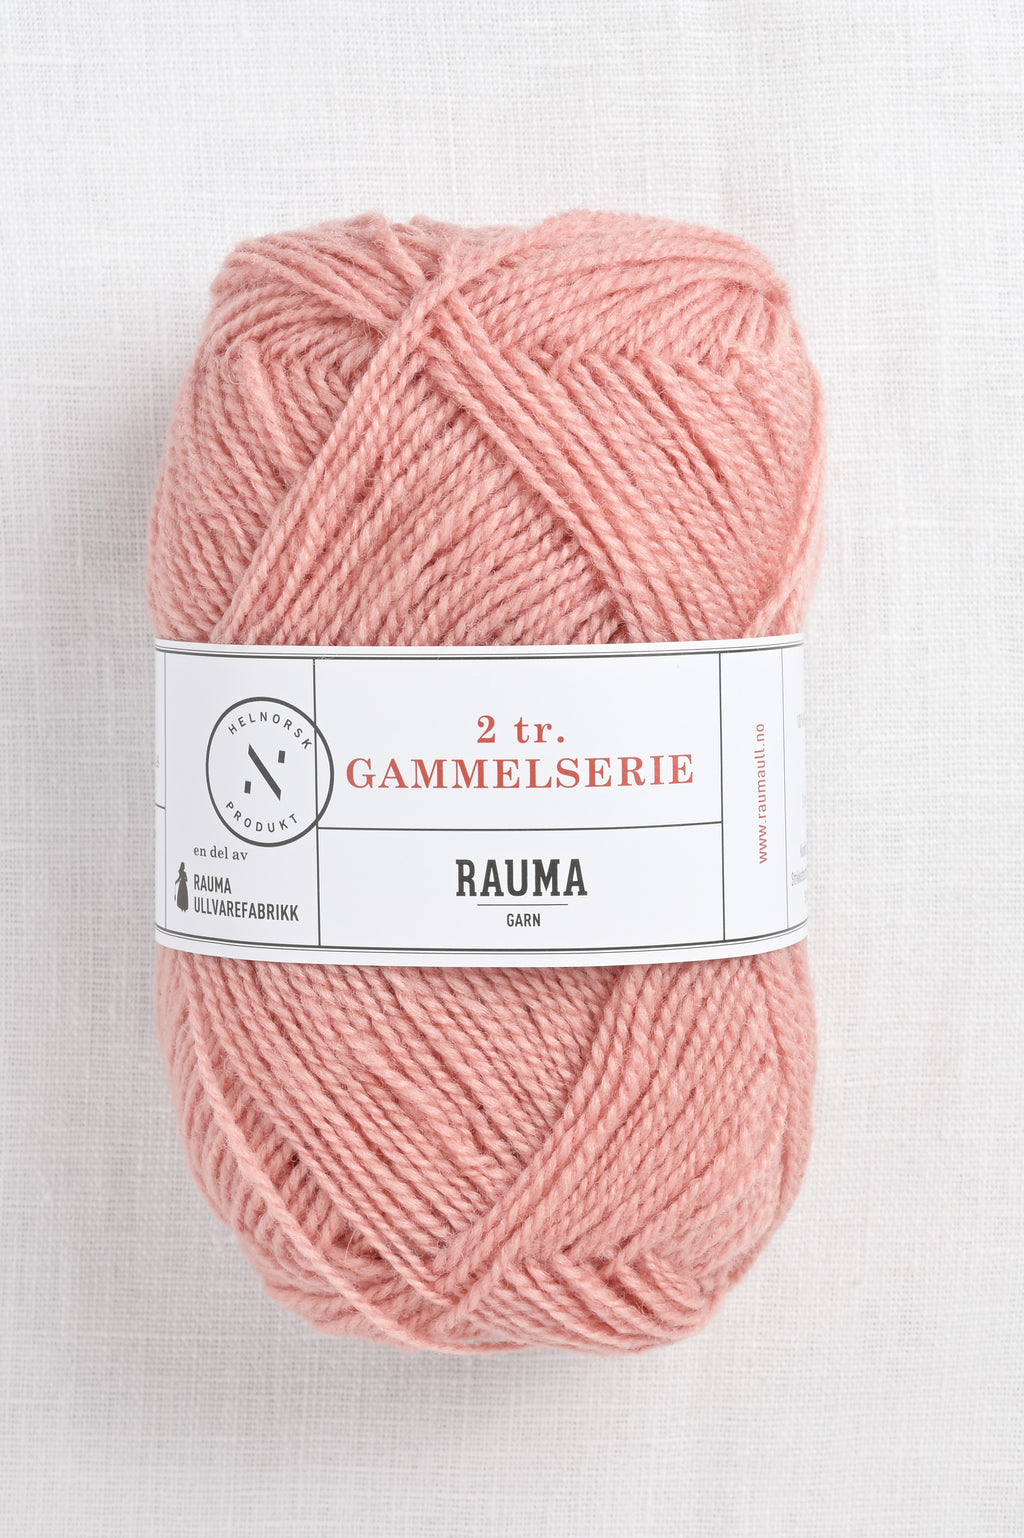 Rauma 2-Ply Gammelserie 4087 Pink